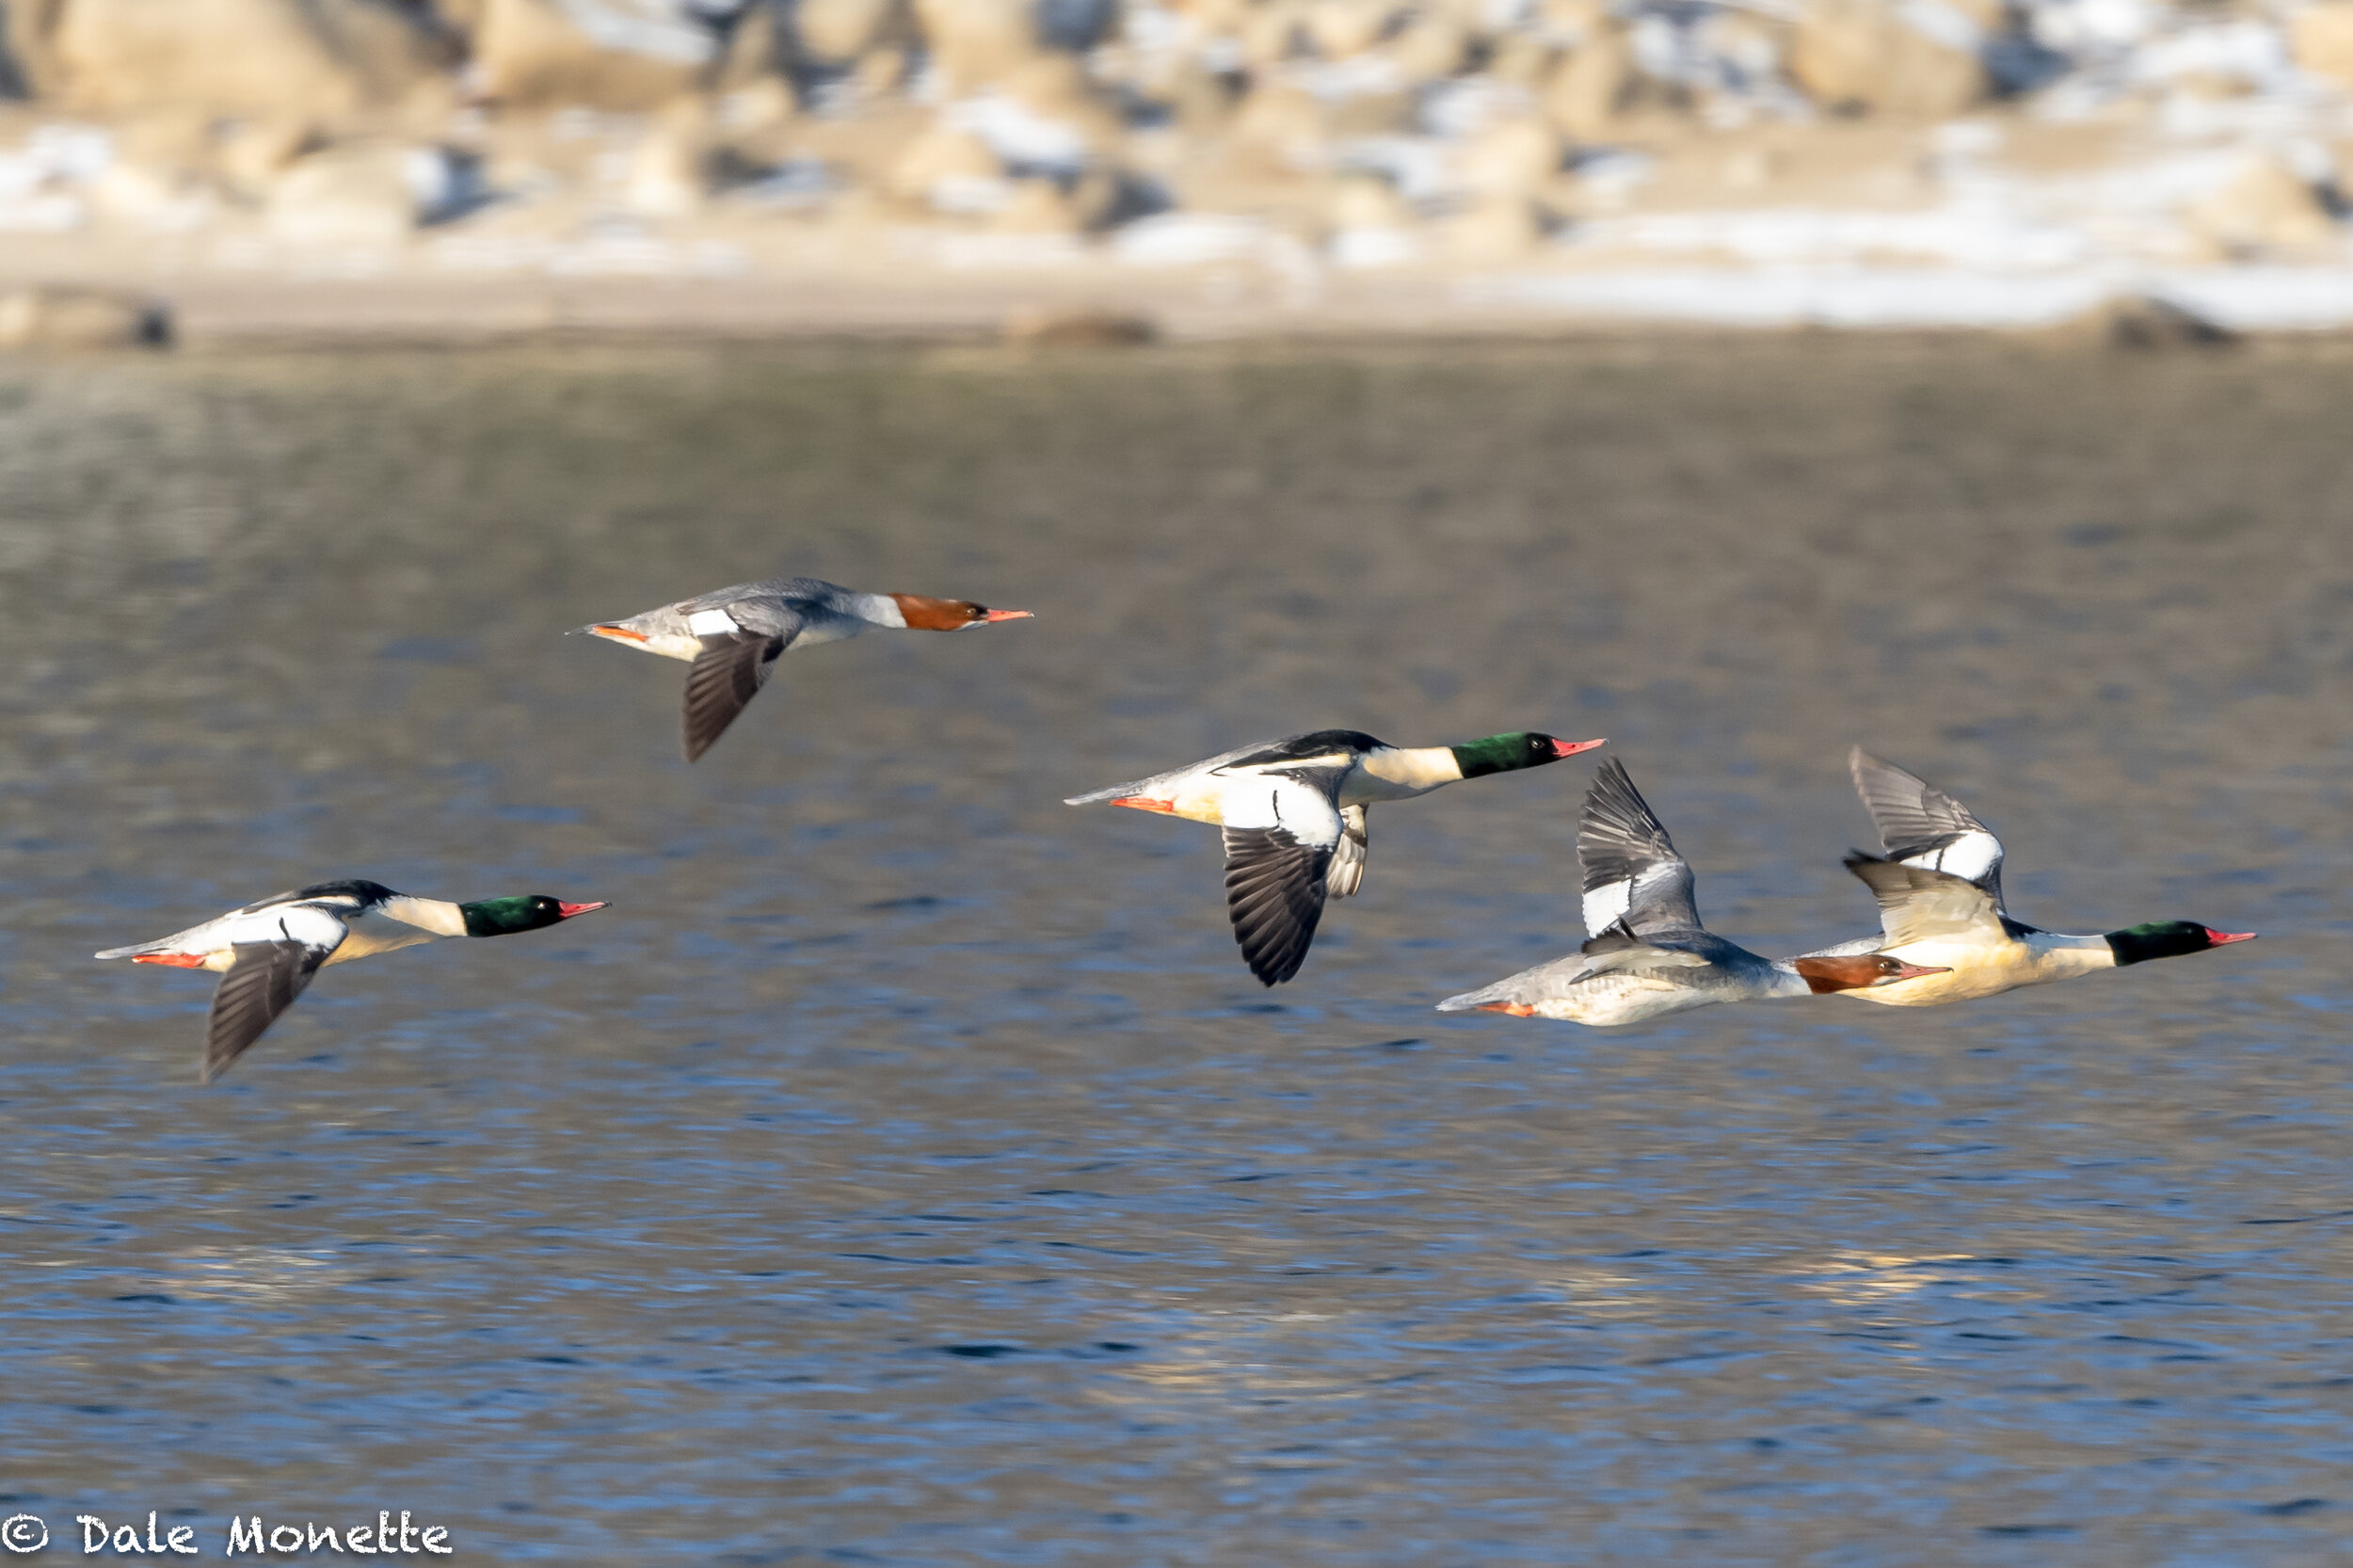   Common mergansers zipping along the shoreline of the Quabbin Reservoir one day last week…. they remind me of jets in formation.  